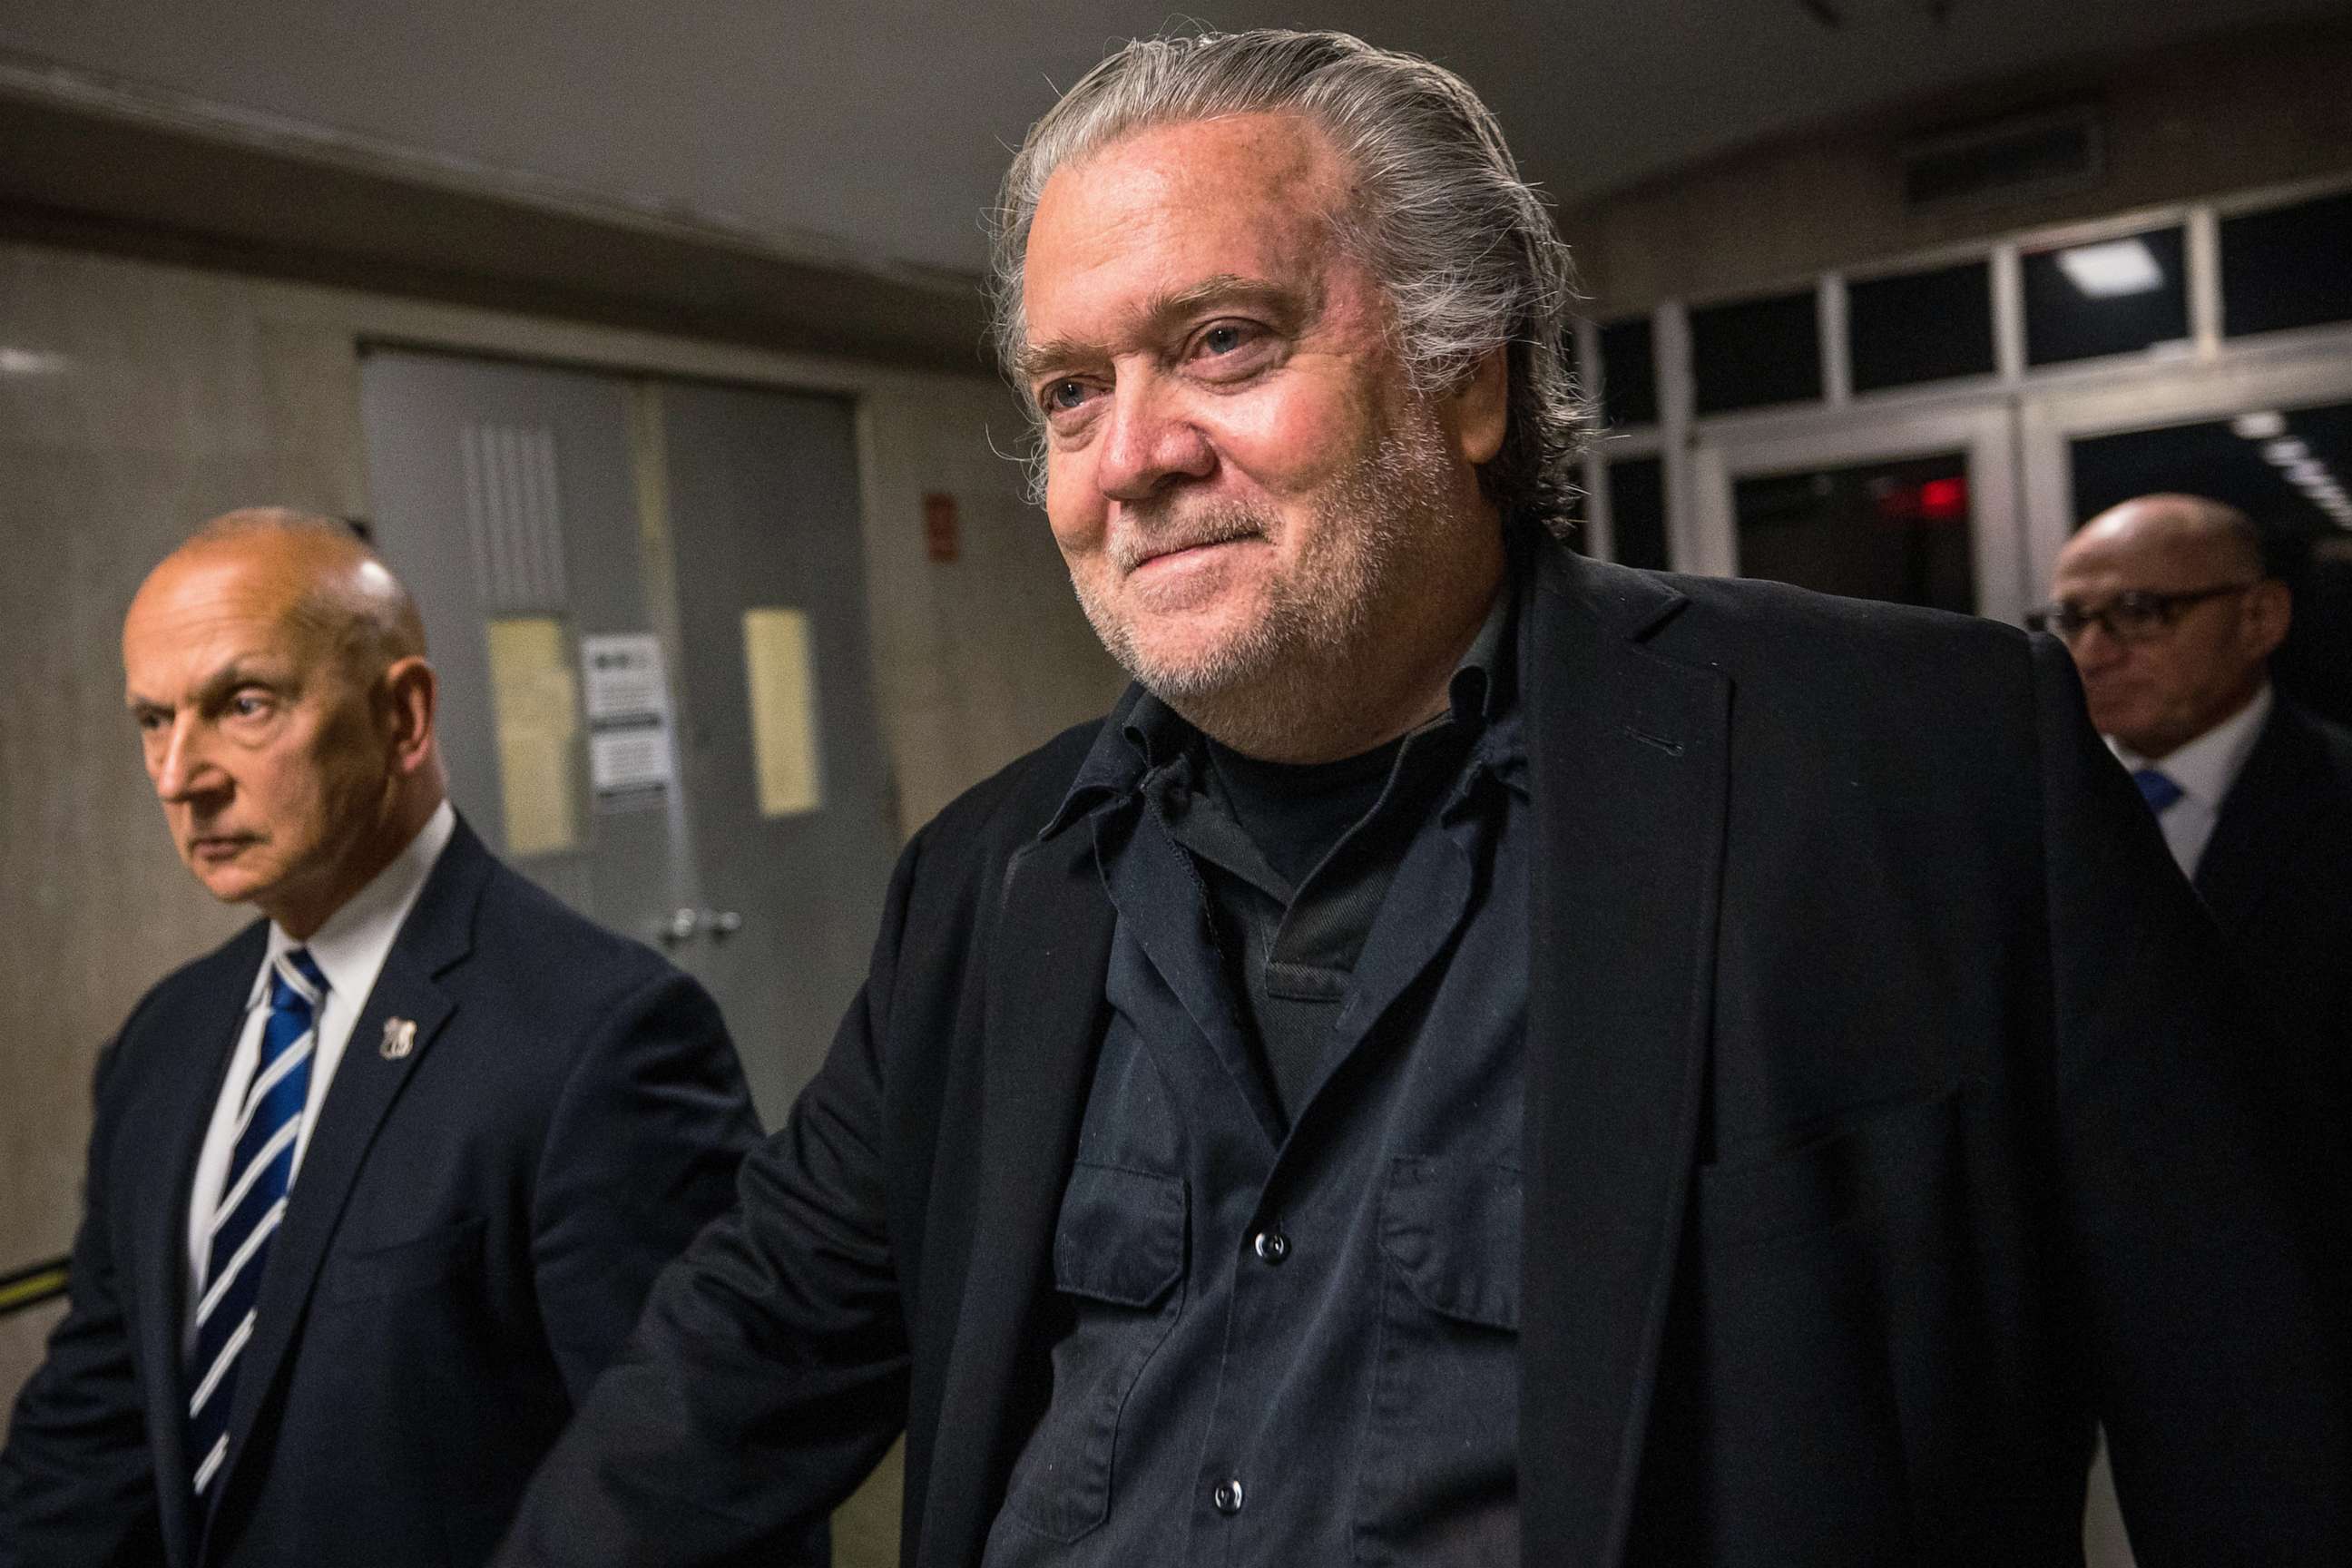 PHOTO: Steve Bannon, former advisor to President Donald Trump, leaves after a court appearance at NYS Supreme Court on May 25, 2023 in New York City.